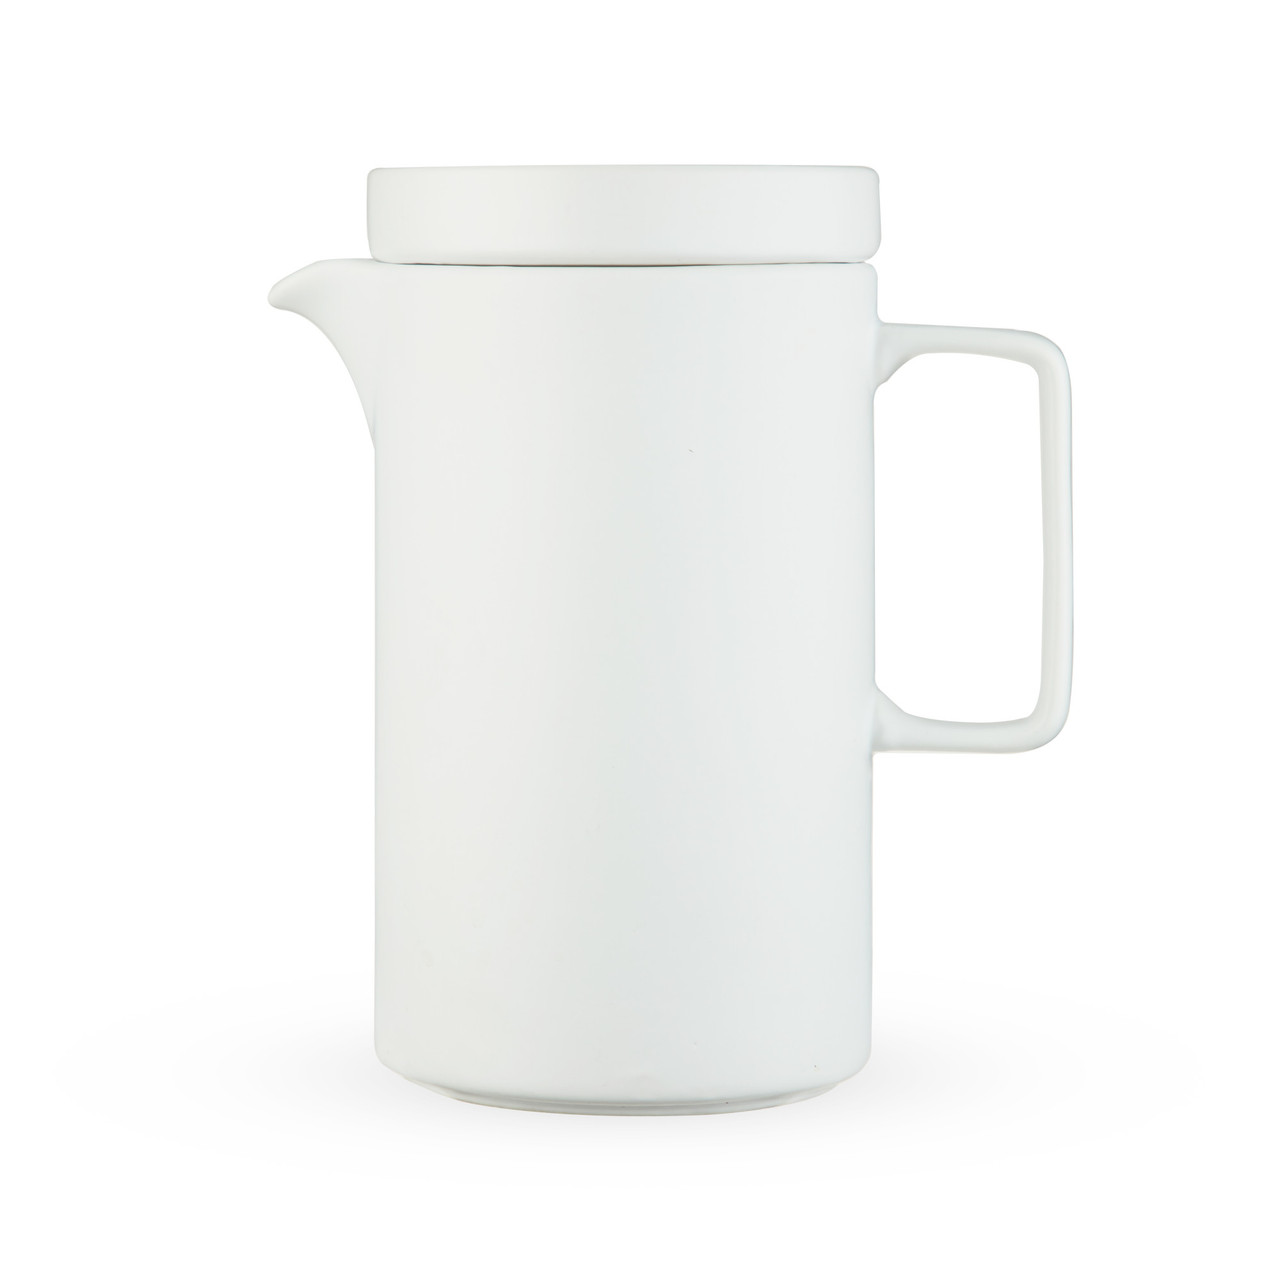 Jona Matte Finish Teapot in White by Pinky Up